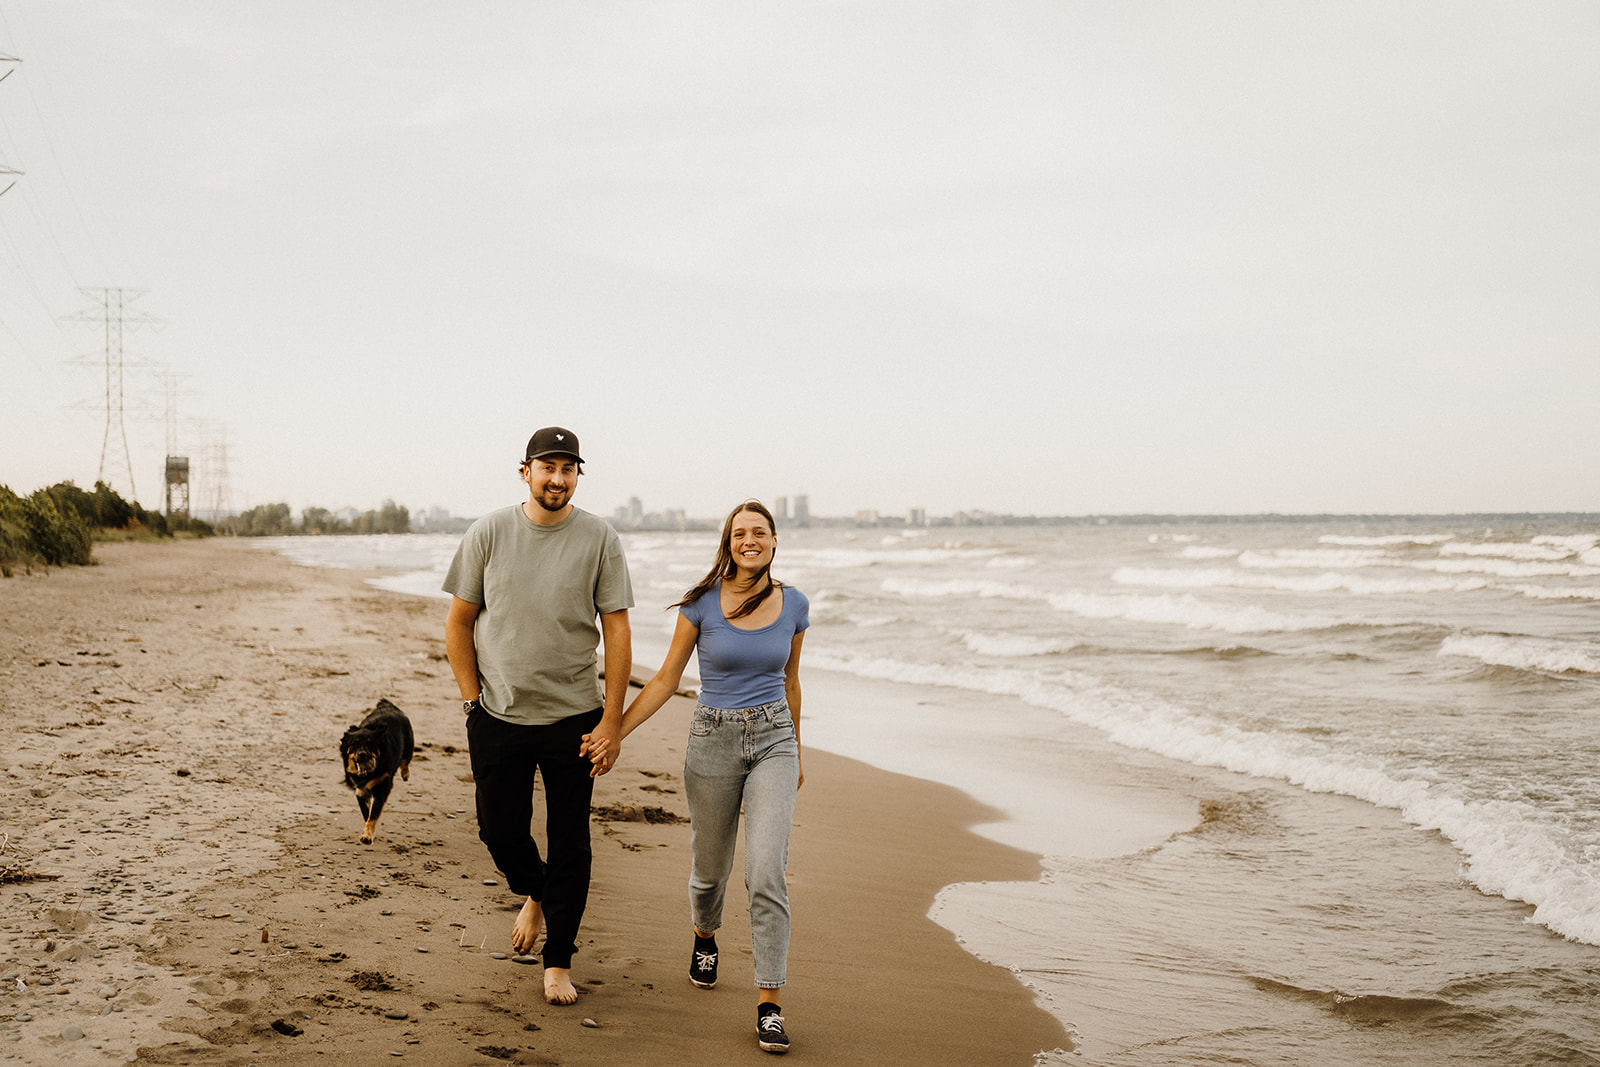 A man and woman walking on the beach together.